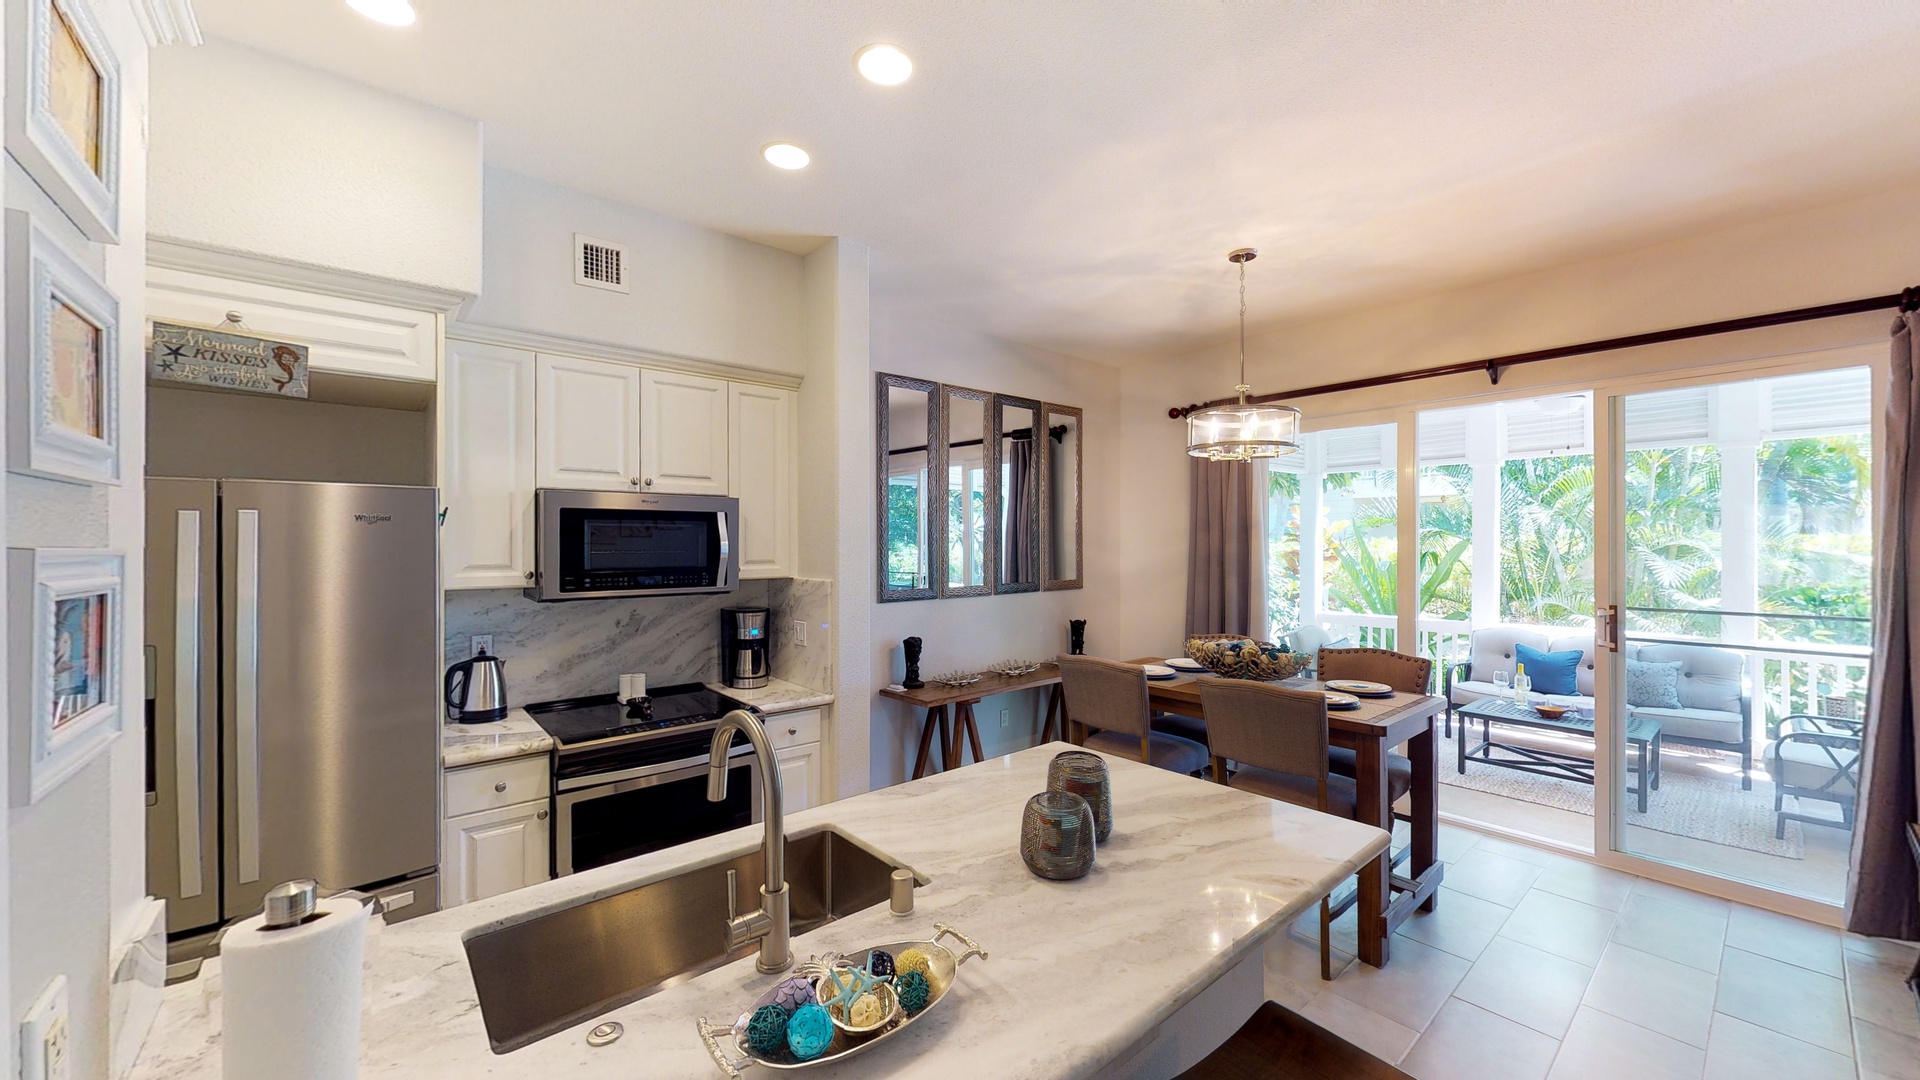 Kapolei Vacation Rentals, Coconut Plantation 1222-3 - The kitchen is equipped with stainless steel appliances for your culinary adventures.